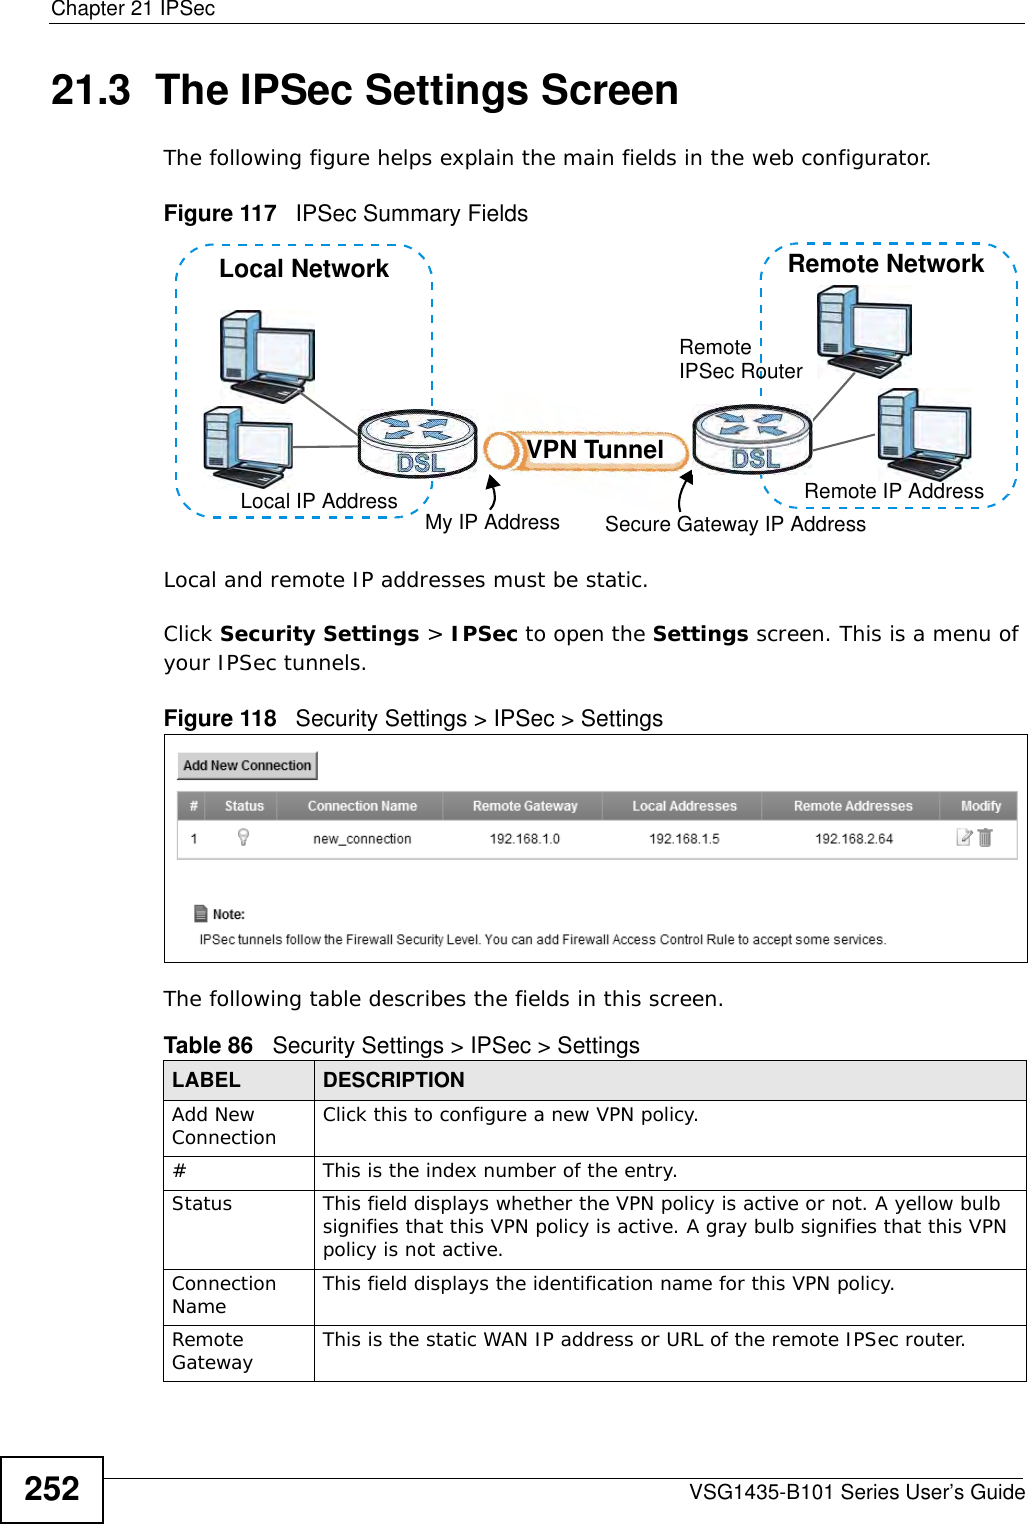 Chapter 21 IPSecVSG1435-B101 Series User’s Guide25221.3  The IPSec Settings Screen The following figure helps explain the main fields in the web configurator.Figure 117   IPSec Summary FieldsLocal and remote IP addresses must be static.Click Security Settings &gt; IPSec to open the Settings screen. This is a menu of your IPSec tunnels. Figure 118   Security Settings &gt; IPSec &gt; SettingsThe following table describes the fields in this screen.Table 86   Security Settings &gt; IPSec &gt; SettingsLABEL DESCRIPTIONAdd New Connection Click this to configure a new VPN policy.#This is the index number of the entry.Status This field displays whether the VPN policy is active or not. A yellow bulb signifies that this VPN policy is active. A gray bulb signifies that this VPN policy is not active.Connection Name This field displays the identification name for this VPN policy. Remote Gateway This is the static WAN IP address or URL of the remote IPSec router. Local NetworkLocal IP Address My IP Address Secure Gateway IP AddressRemote NetworkRemote IP AddressRemote IPSec RouterVPN Tunnel